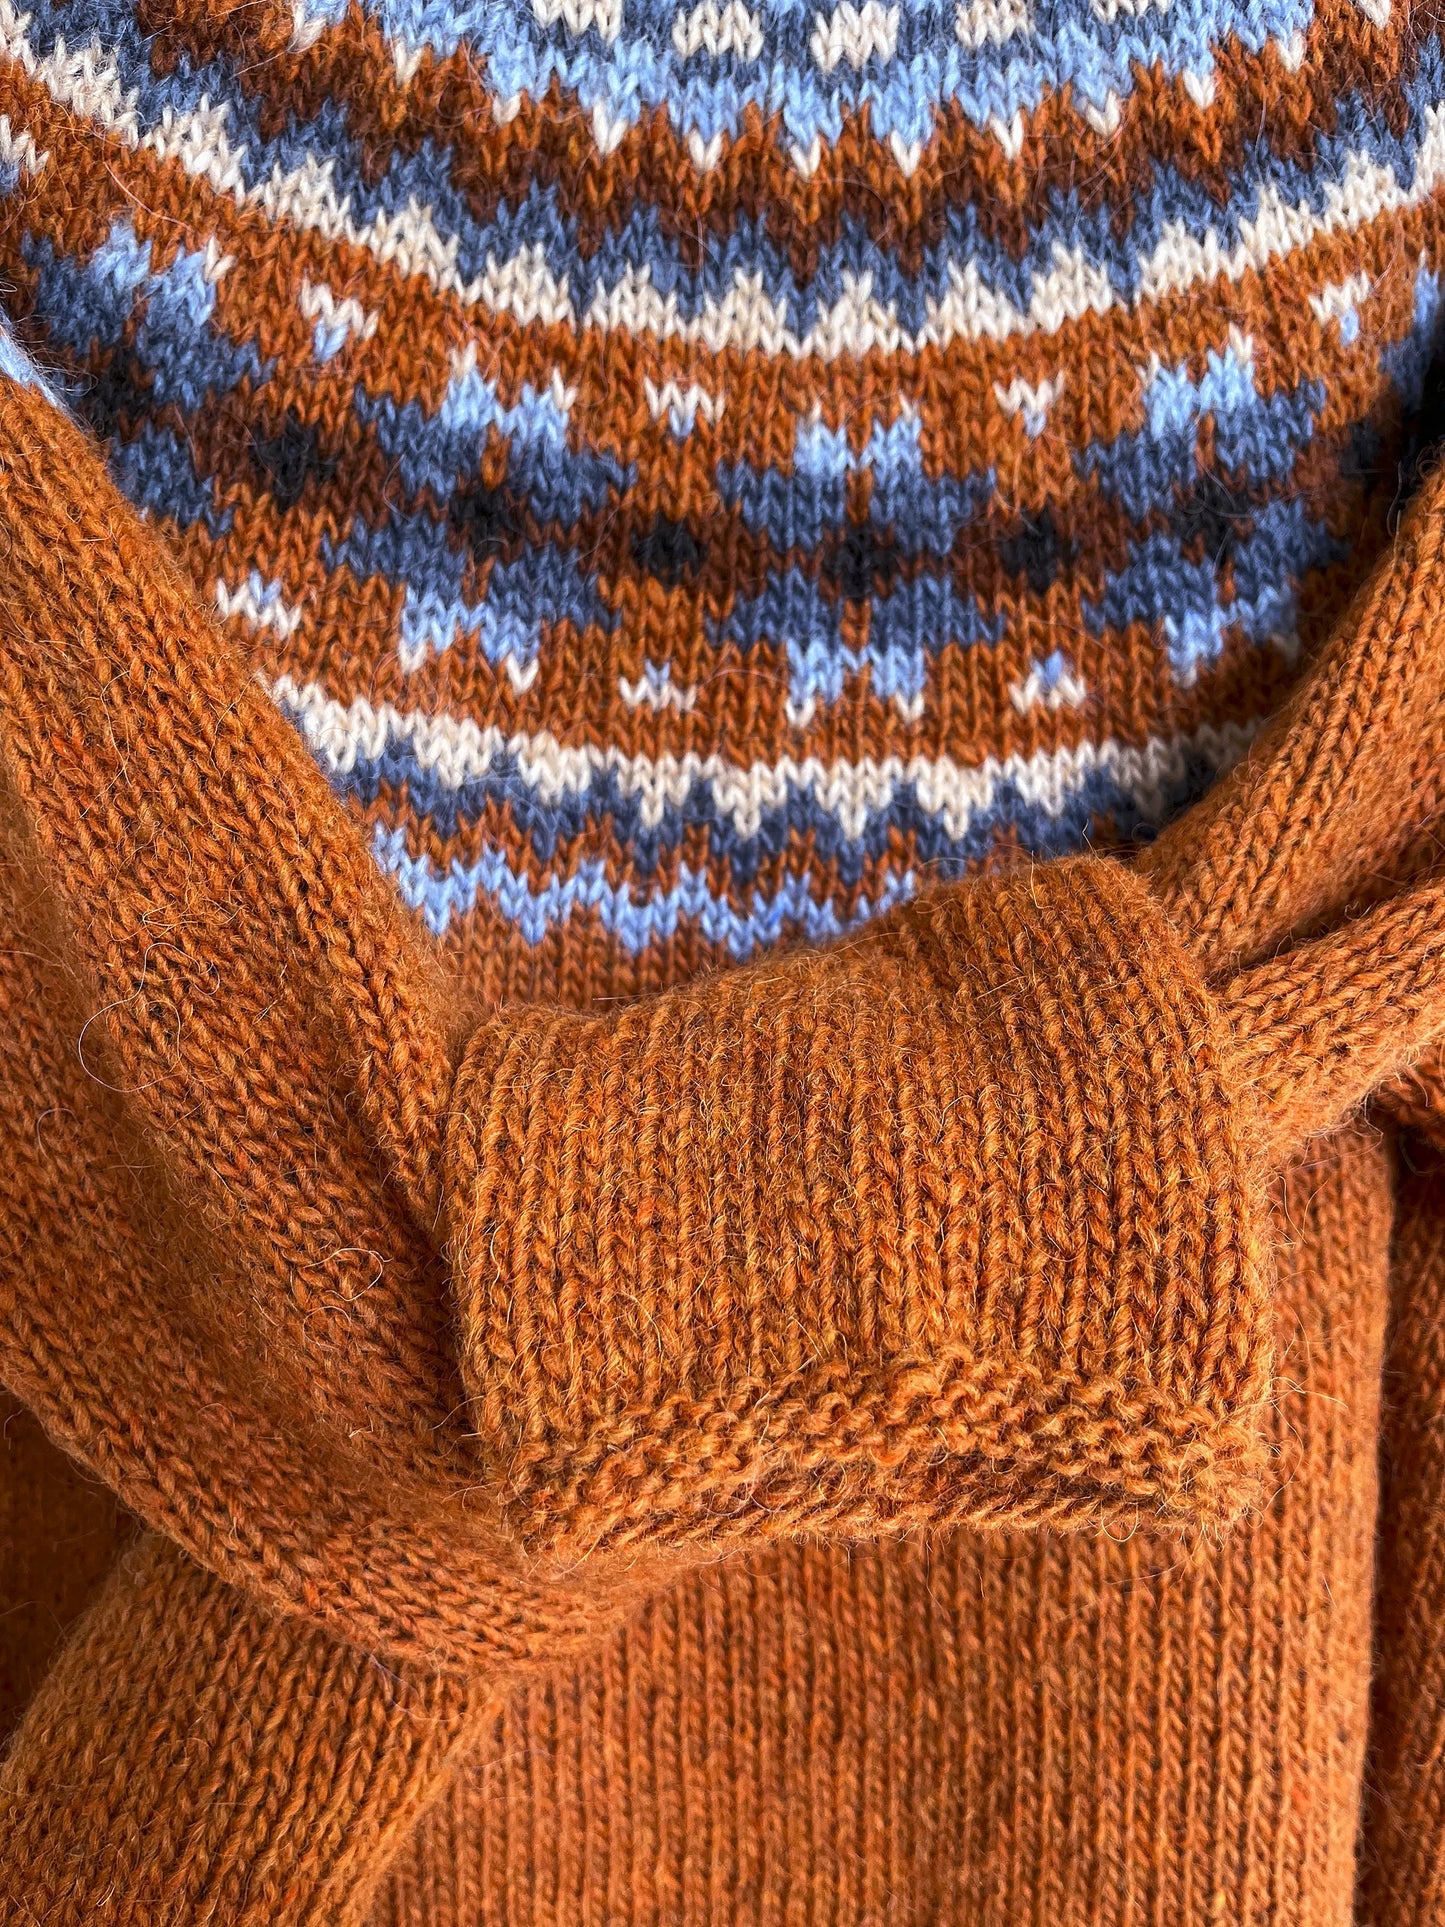 Details of Orange and blue Icelandic lopapeysa knitted sweater from Lettlopi pure Icelandic wool in Rósir design